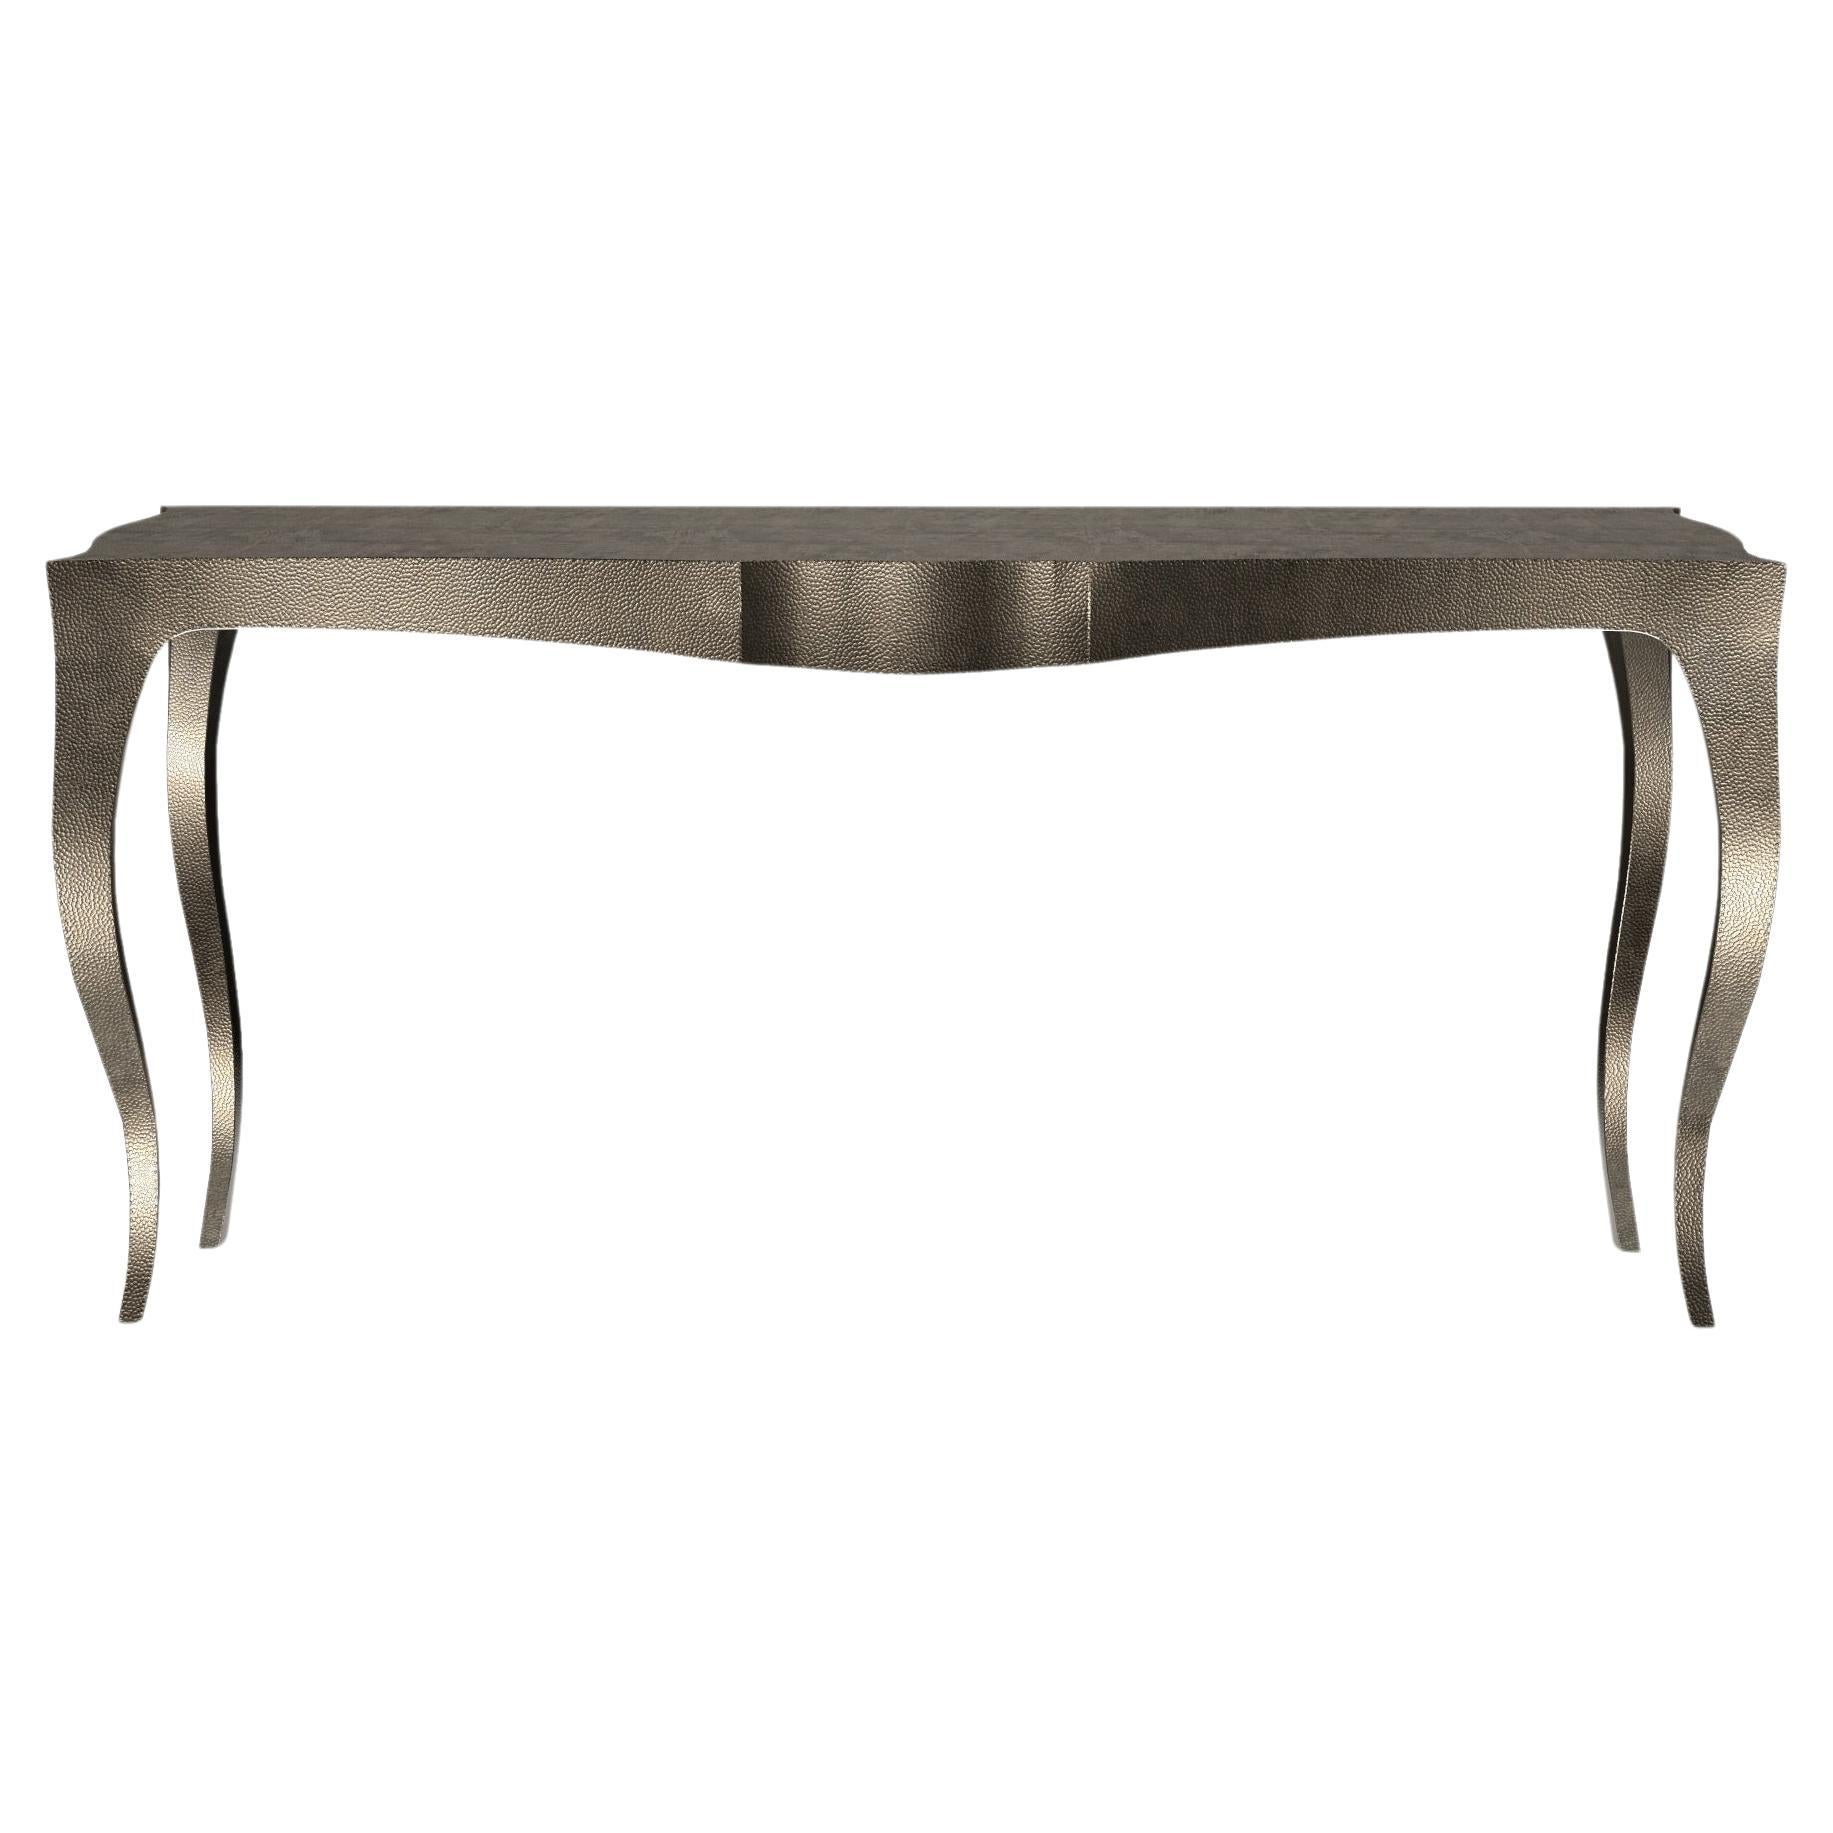 Louise Console Art Deco Nesting and Stacking Tables Mid. Hammered Antique Bronze For Sale